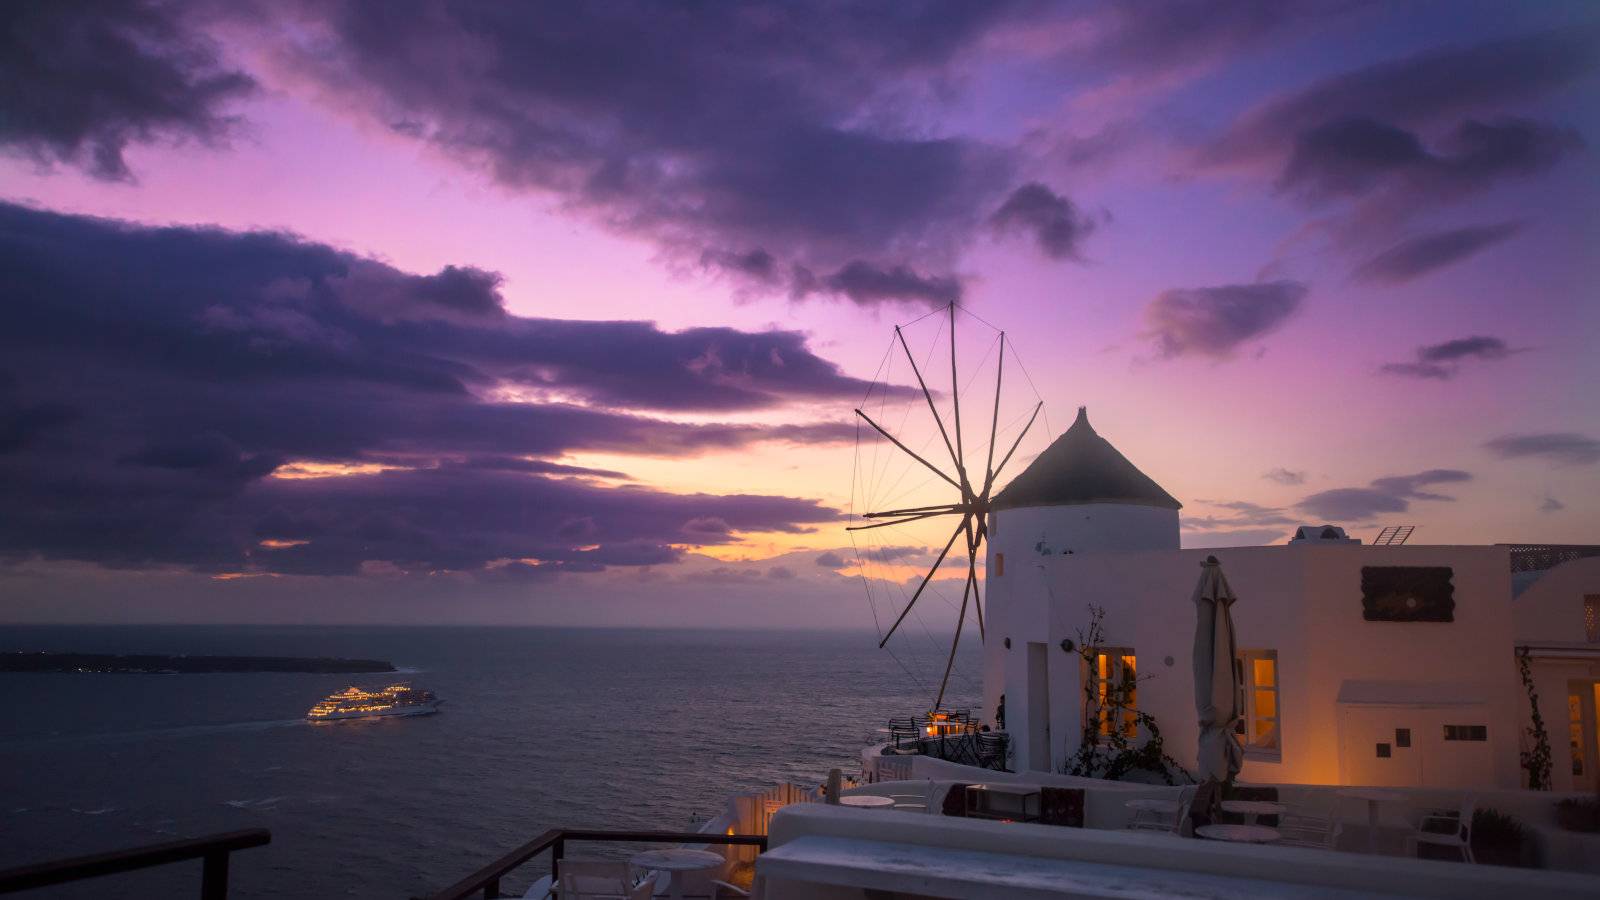 A white windmill in Santorini looking out over a cruise ship on the ocean at sunset.